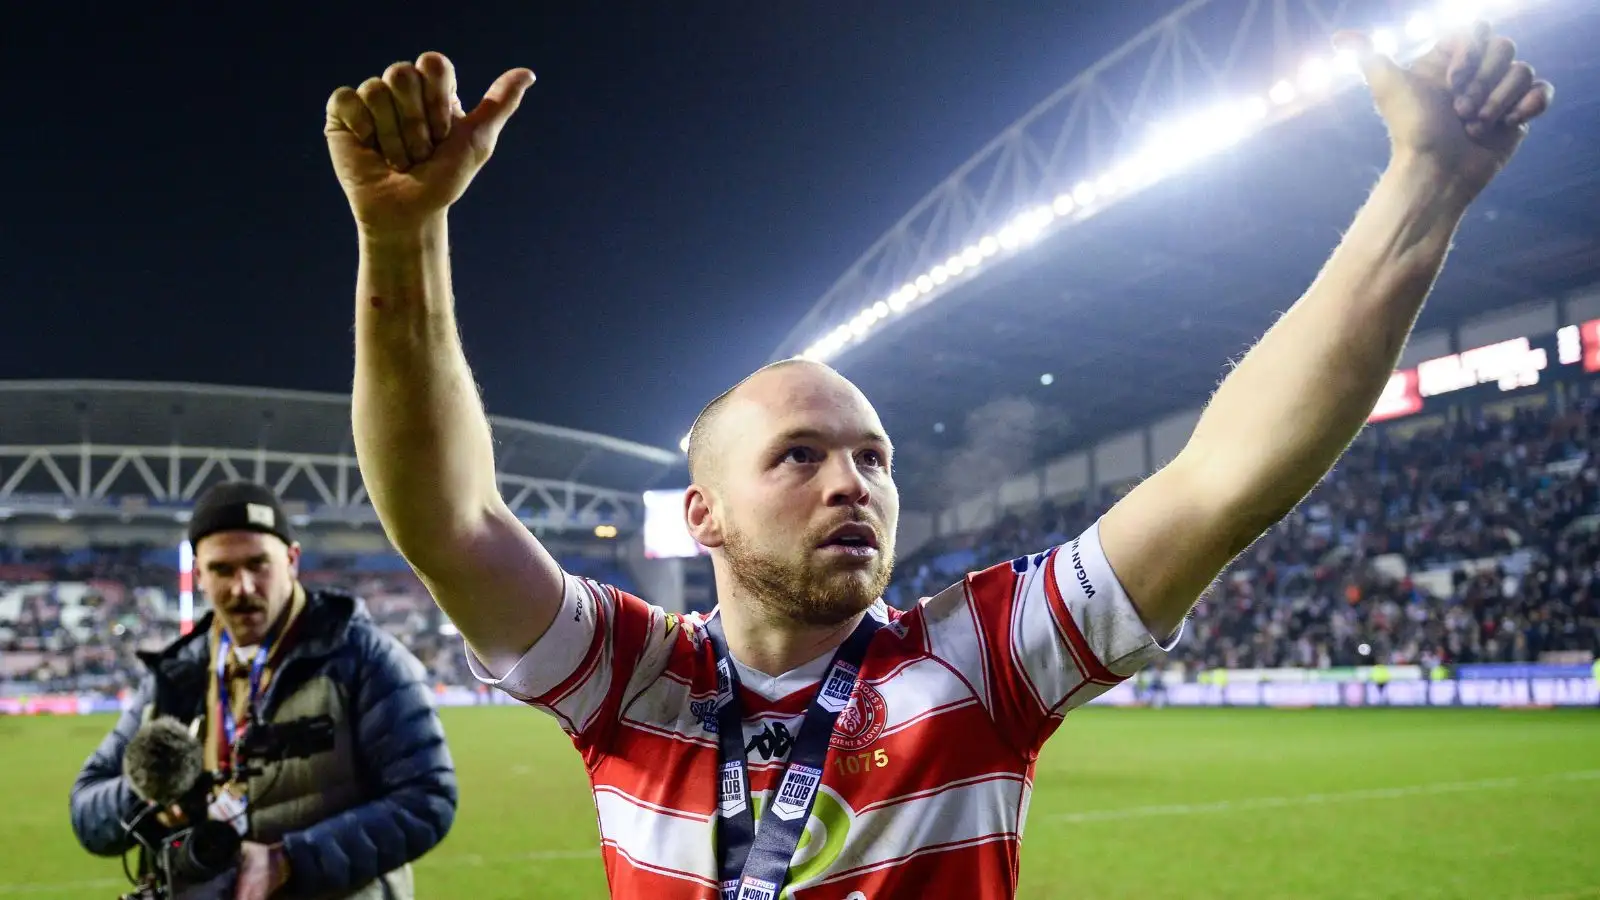 Wigan Warriors’ Liam Marshall lifts lid on family grief, newborn daughter and Matt Peet’s incredible gesture